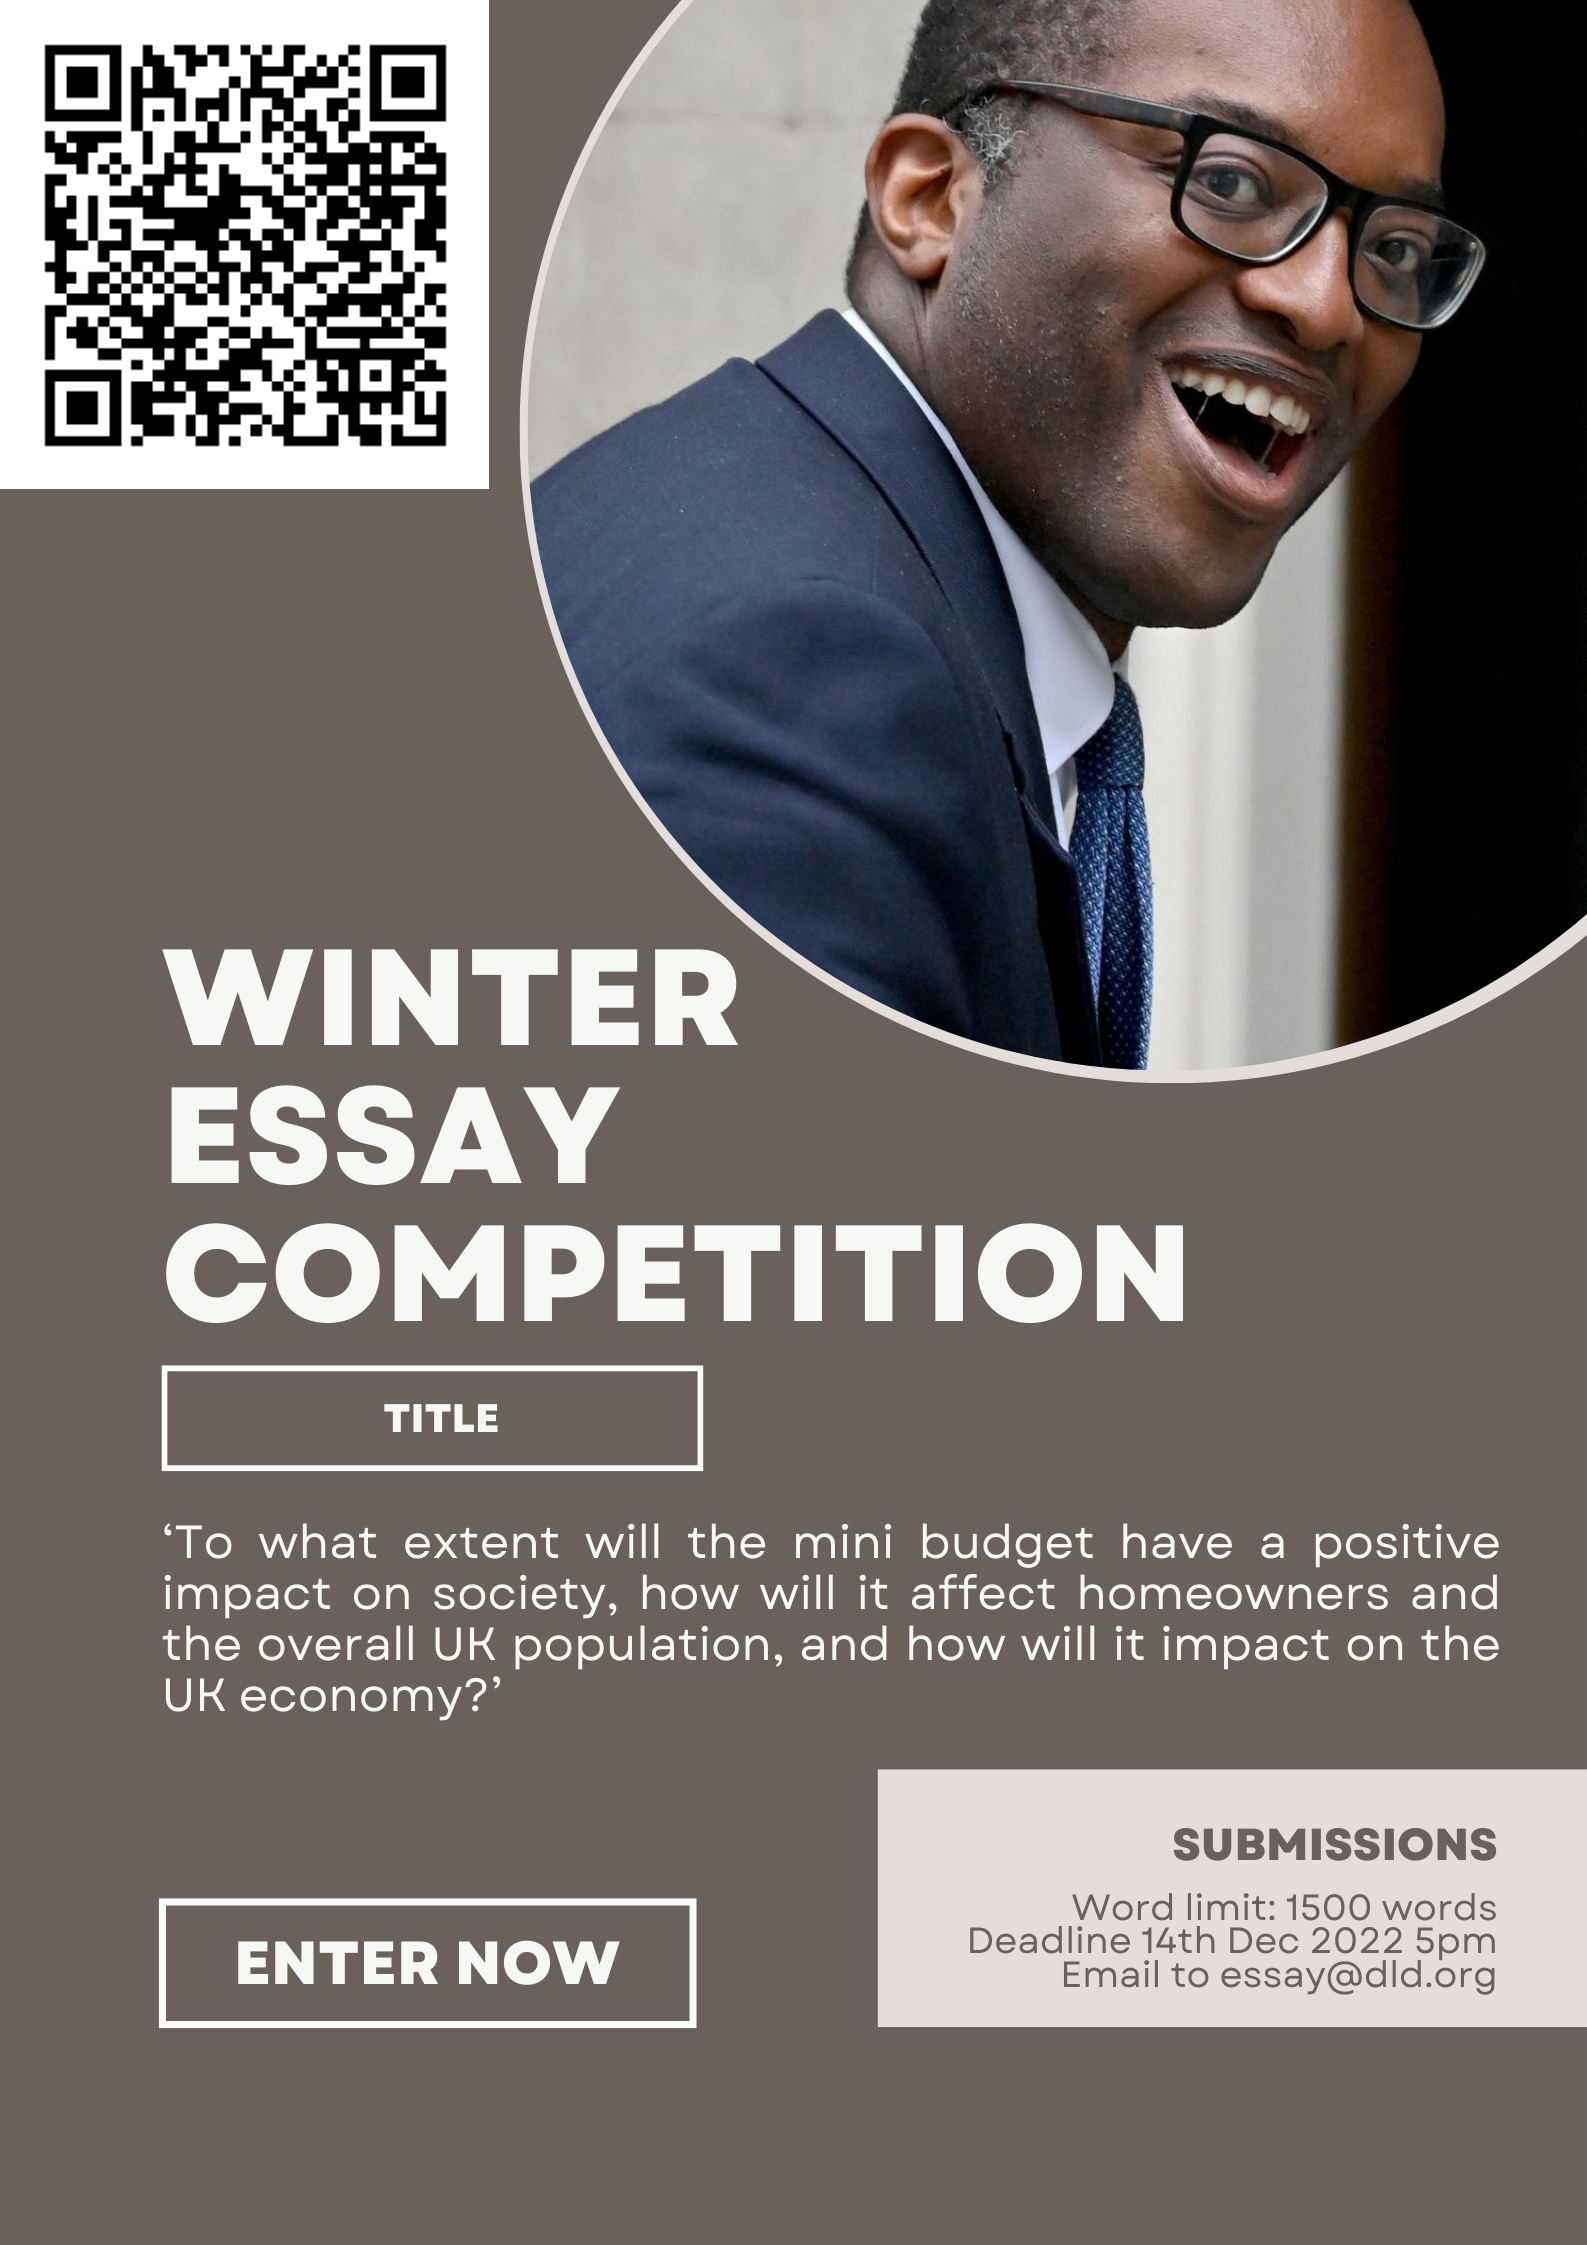 essay competition 2022 uk